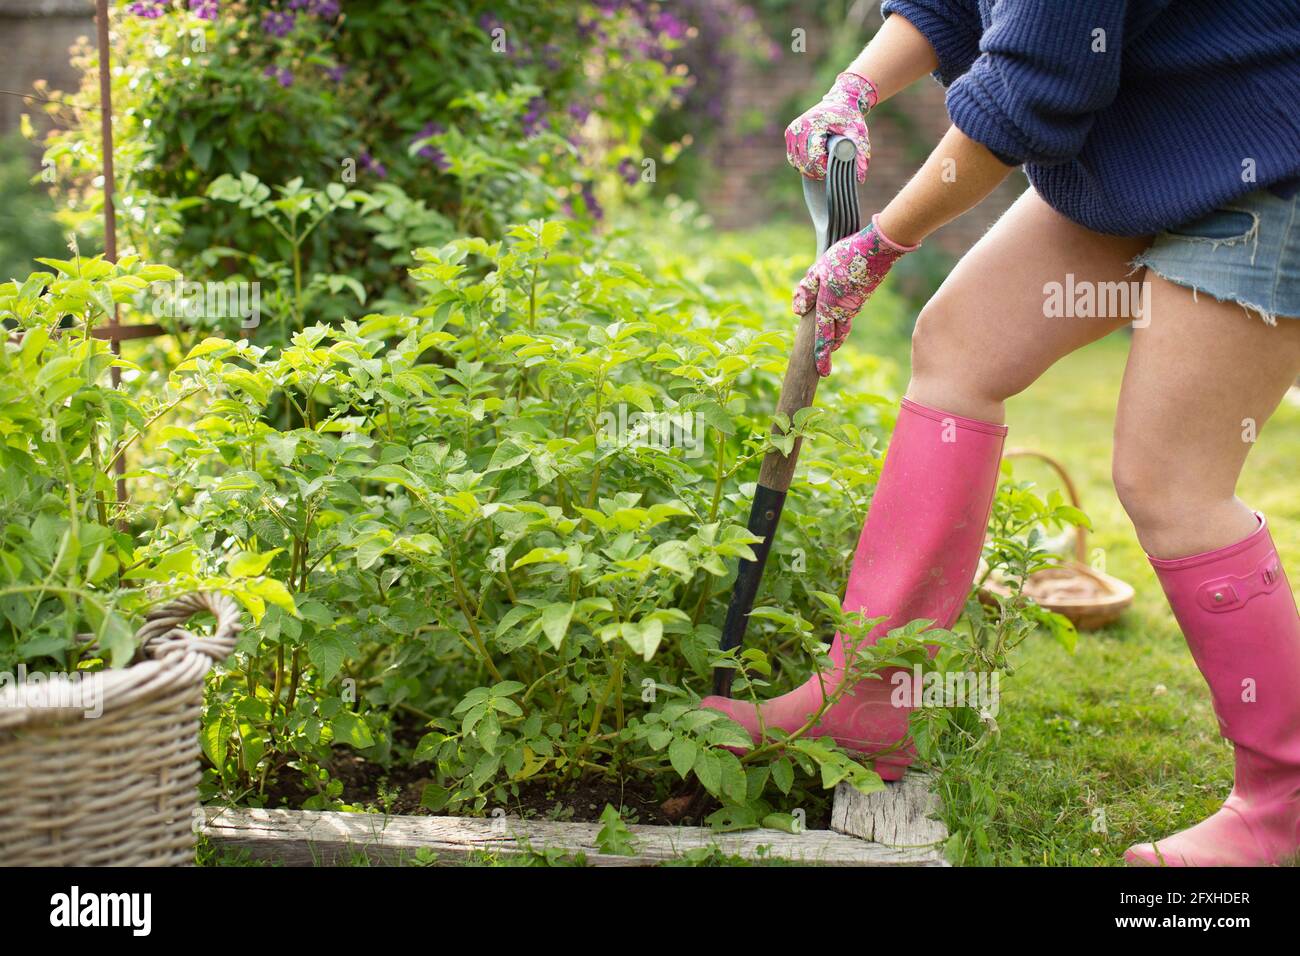 Woman with shovel digging up plants in vegetable garden Stock Photo